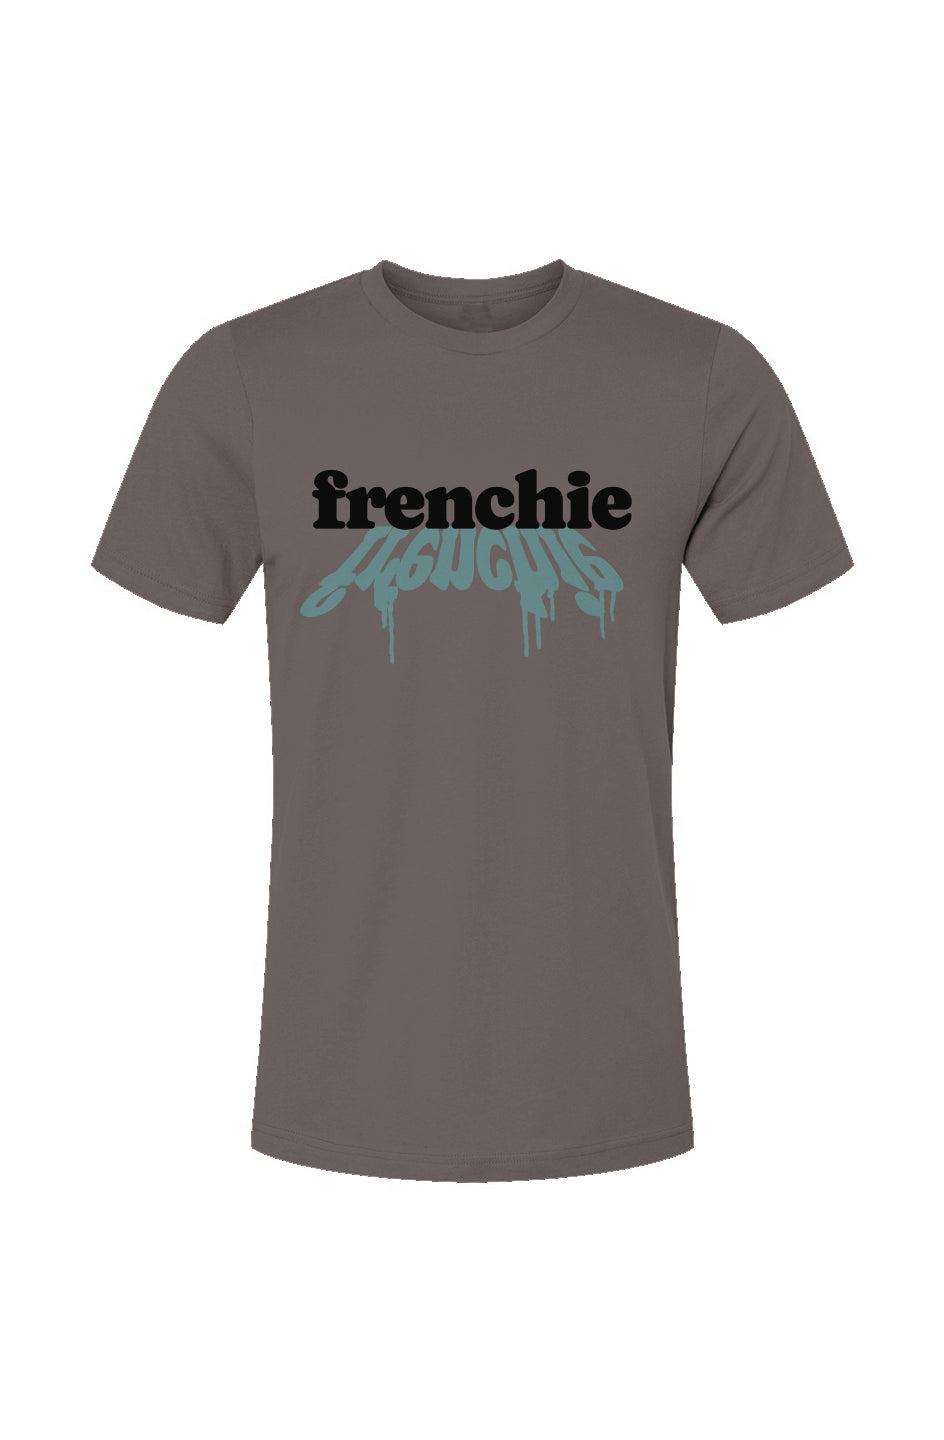 Unisex Jersey T-Shirt-Frenchie Shadow